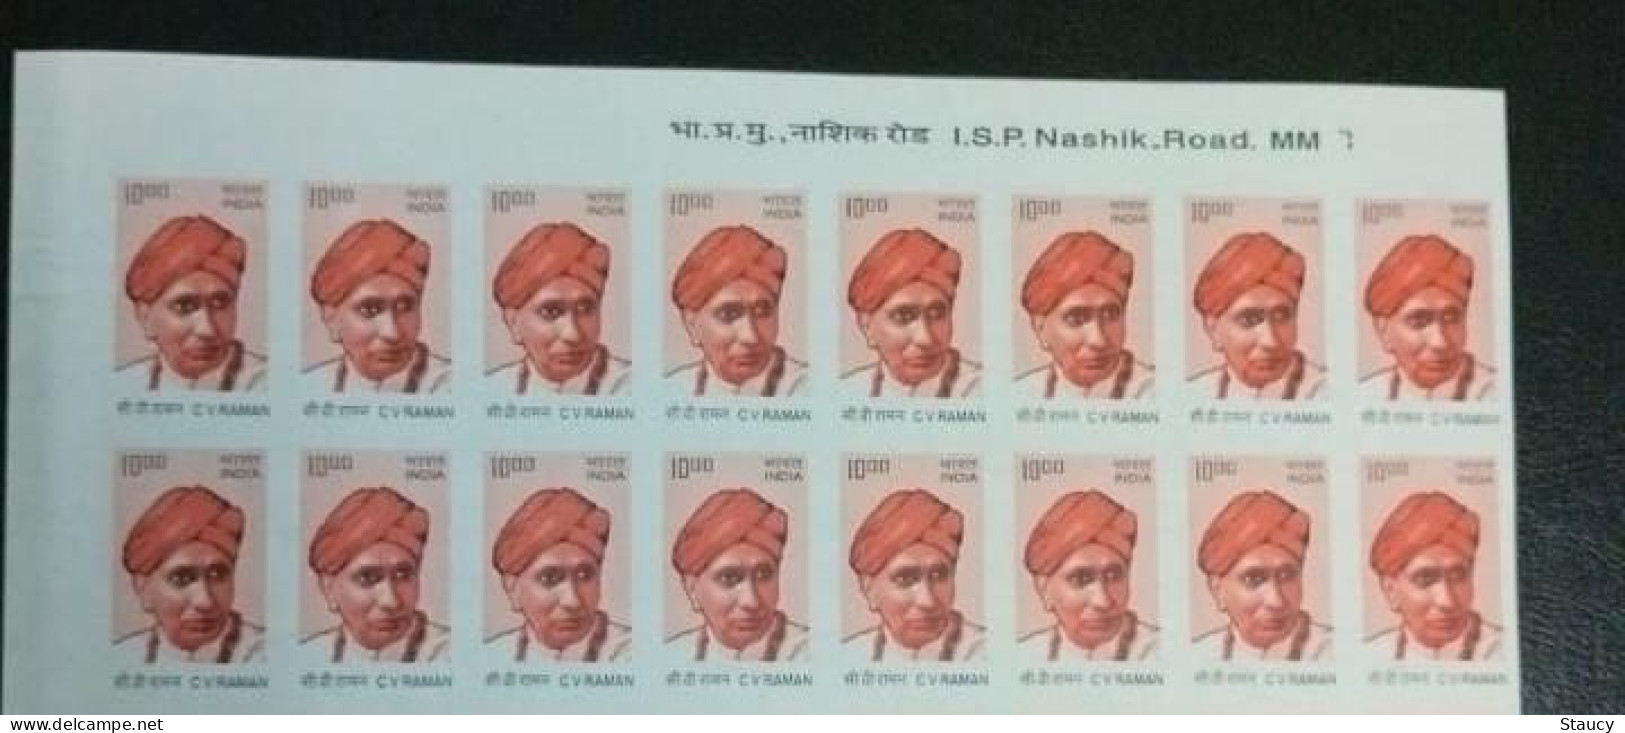 INDIA 2008 Error 10th. Definitive Series C V Raman MNH Error Block Of 16 Stamps "IMPERF" As Per Scan - Erreurs Sur Timbres